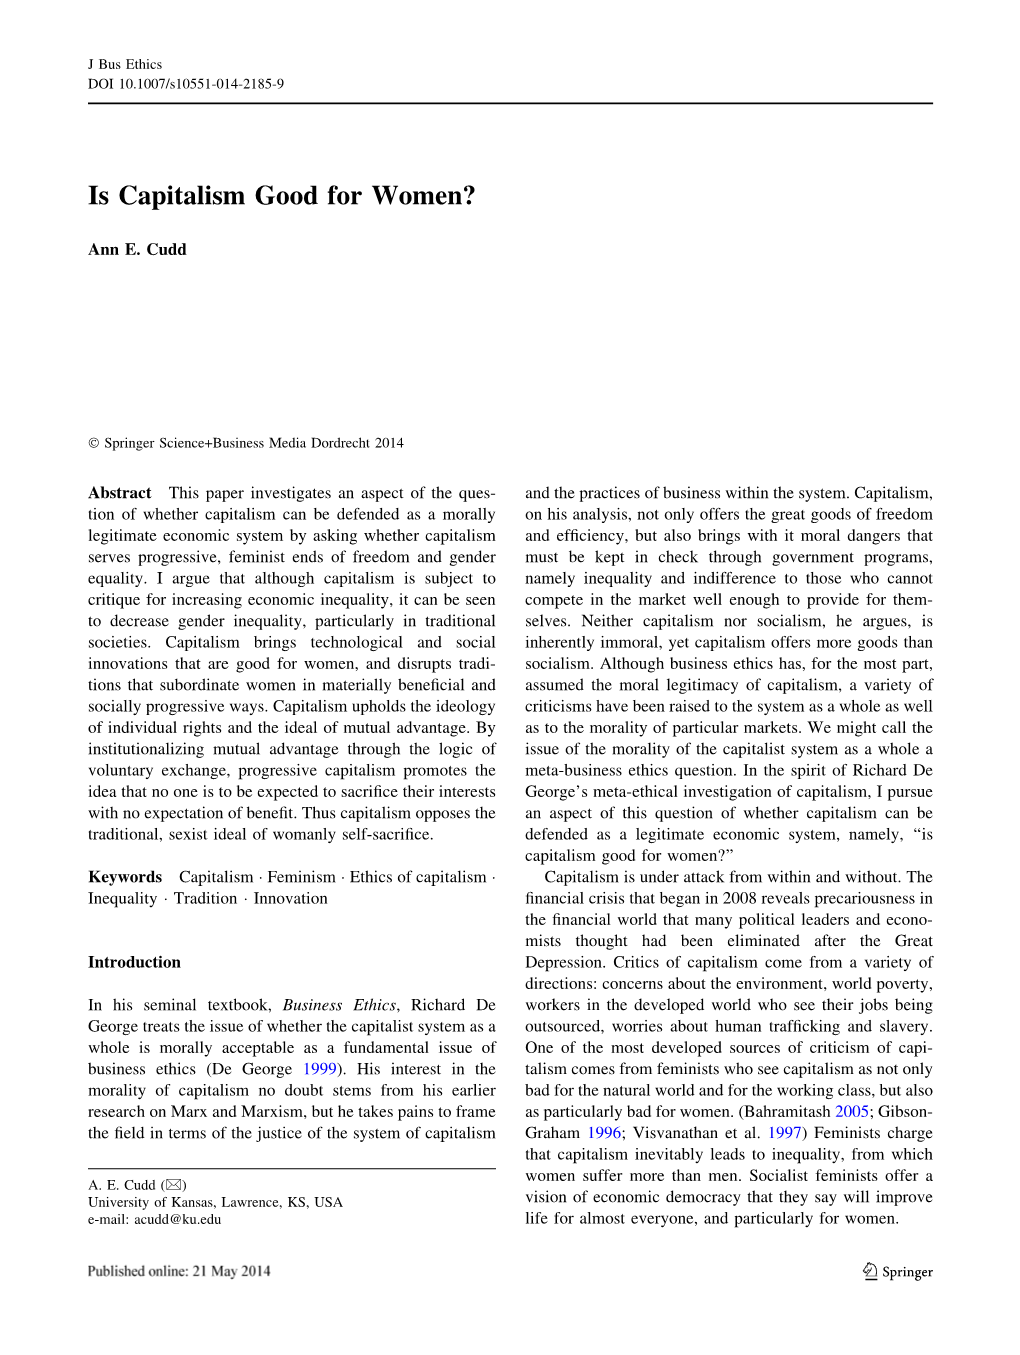 Is Capitalism Good for Women?